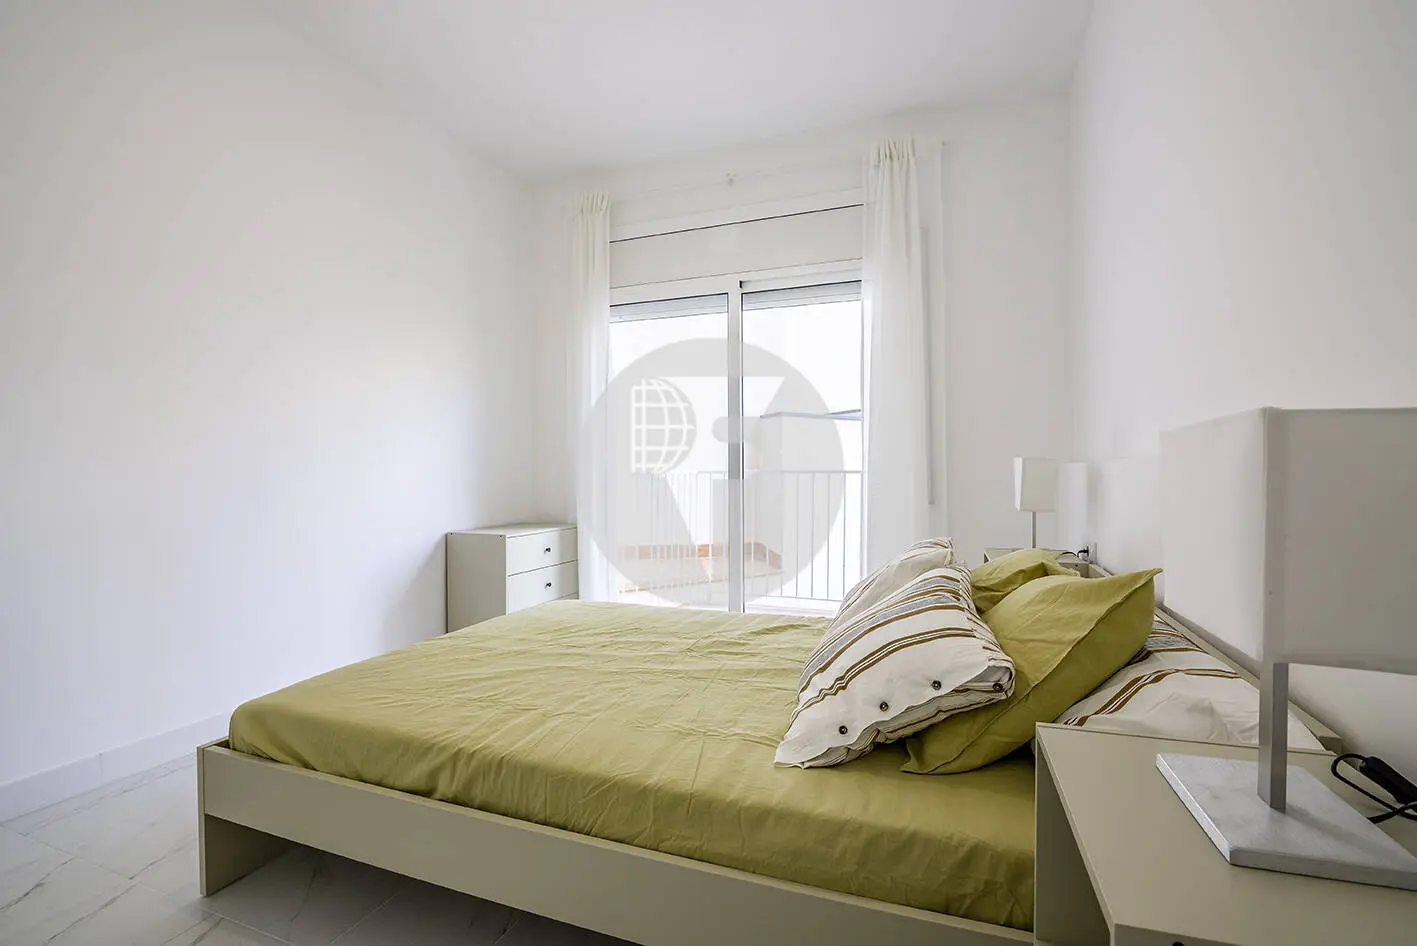 Brand new completely renovated apartment on Aragó street in the heart of El Clot in Barcelona. 32